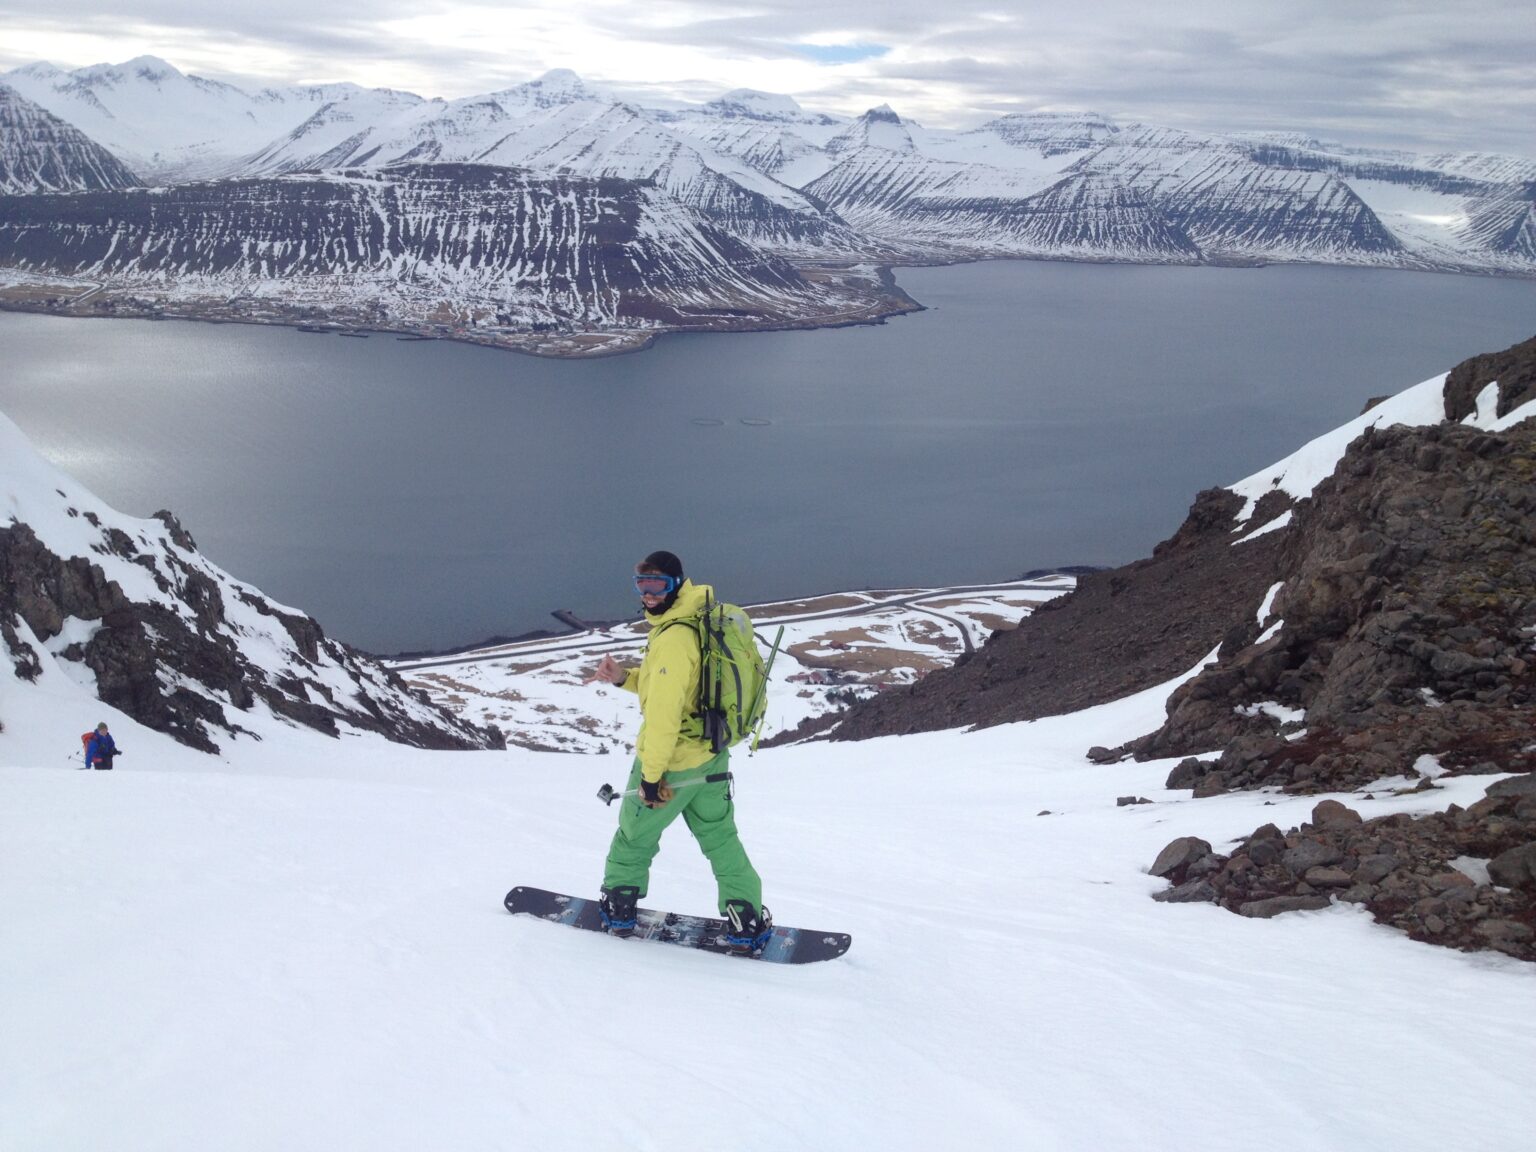 About ready to do some snowboarding around Dýrafjörður in the Westfjords of Iceland